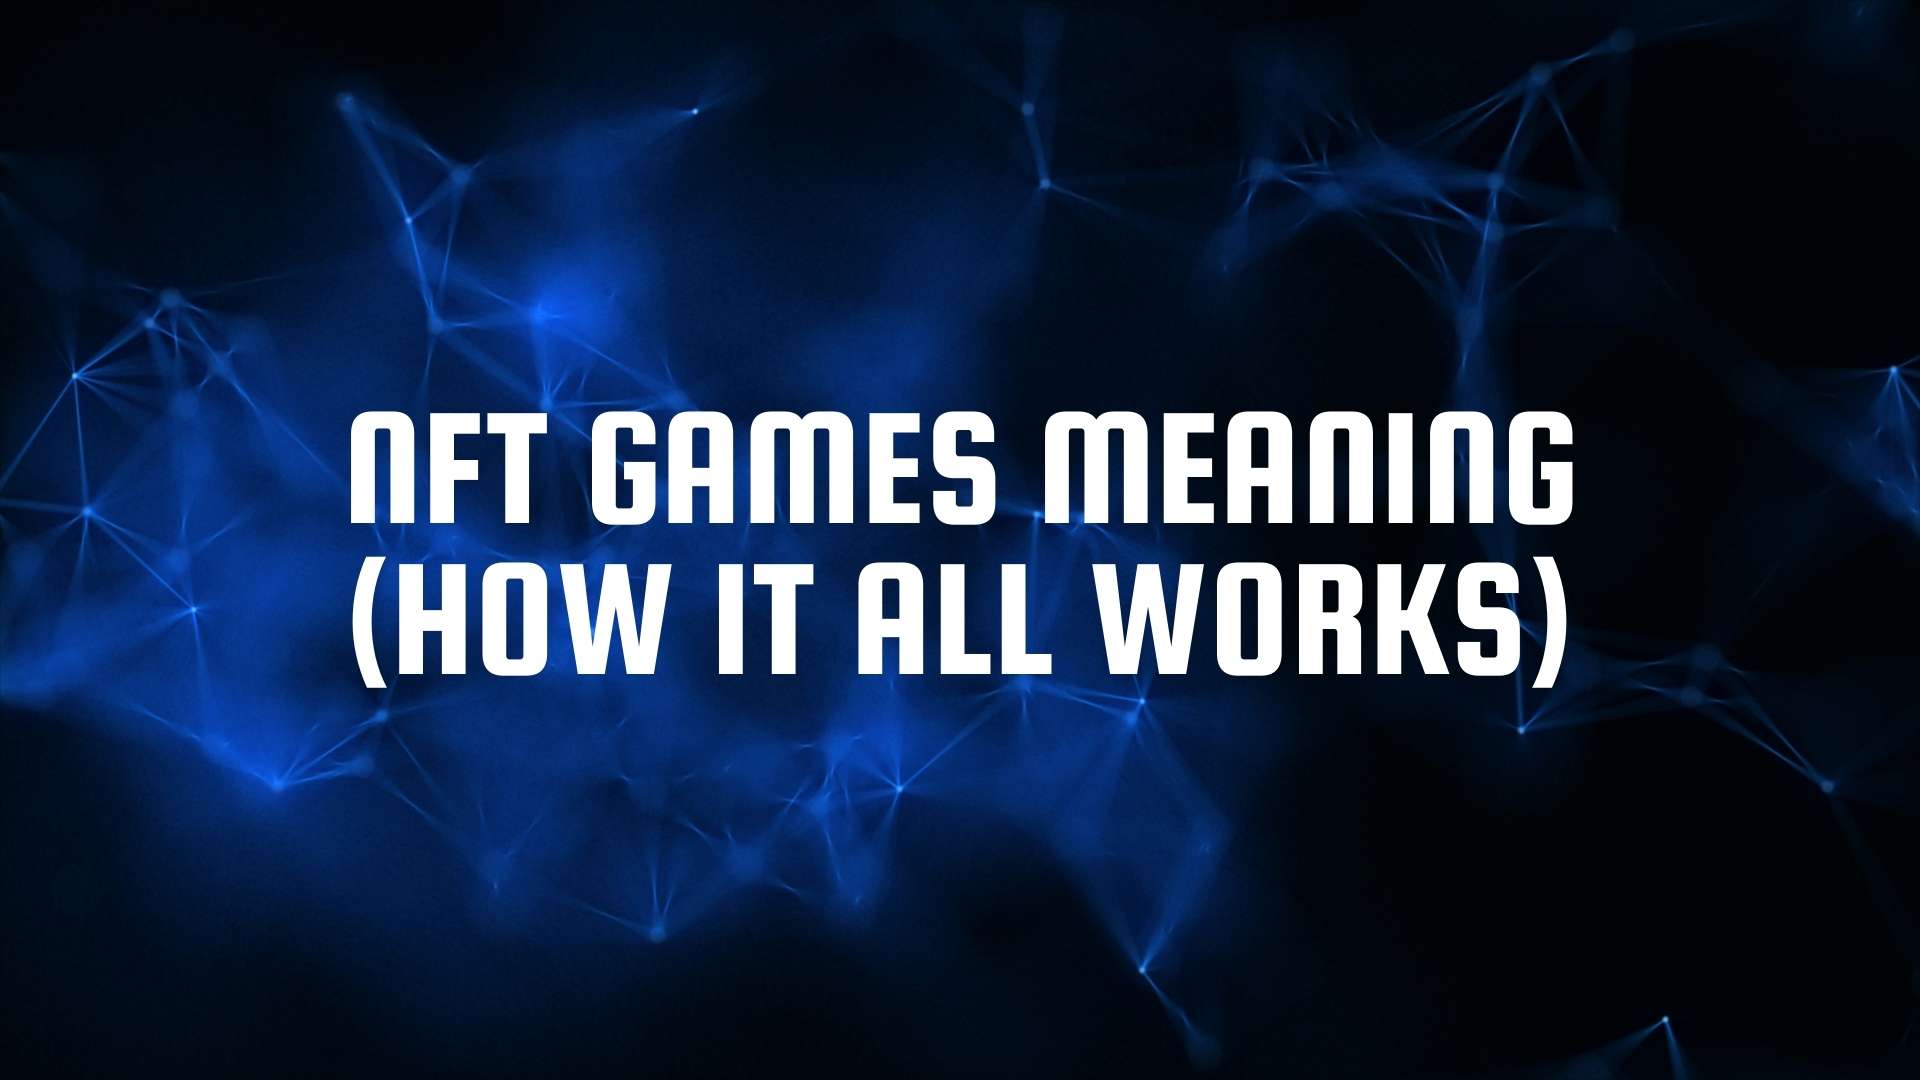 NFT Games Meaning - How it all works